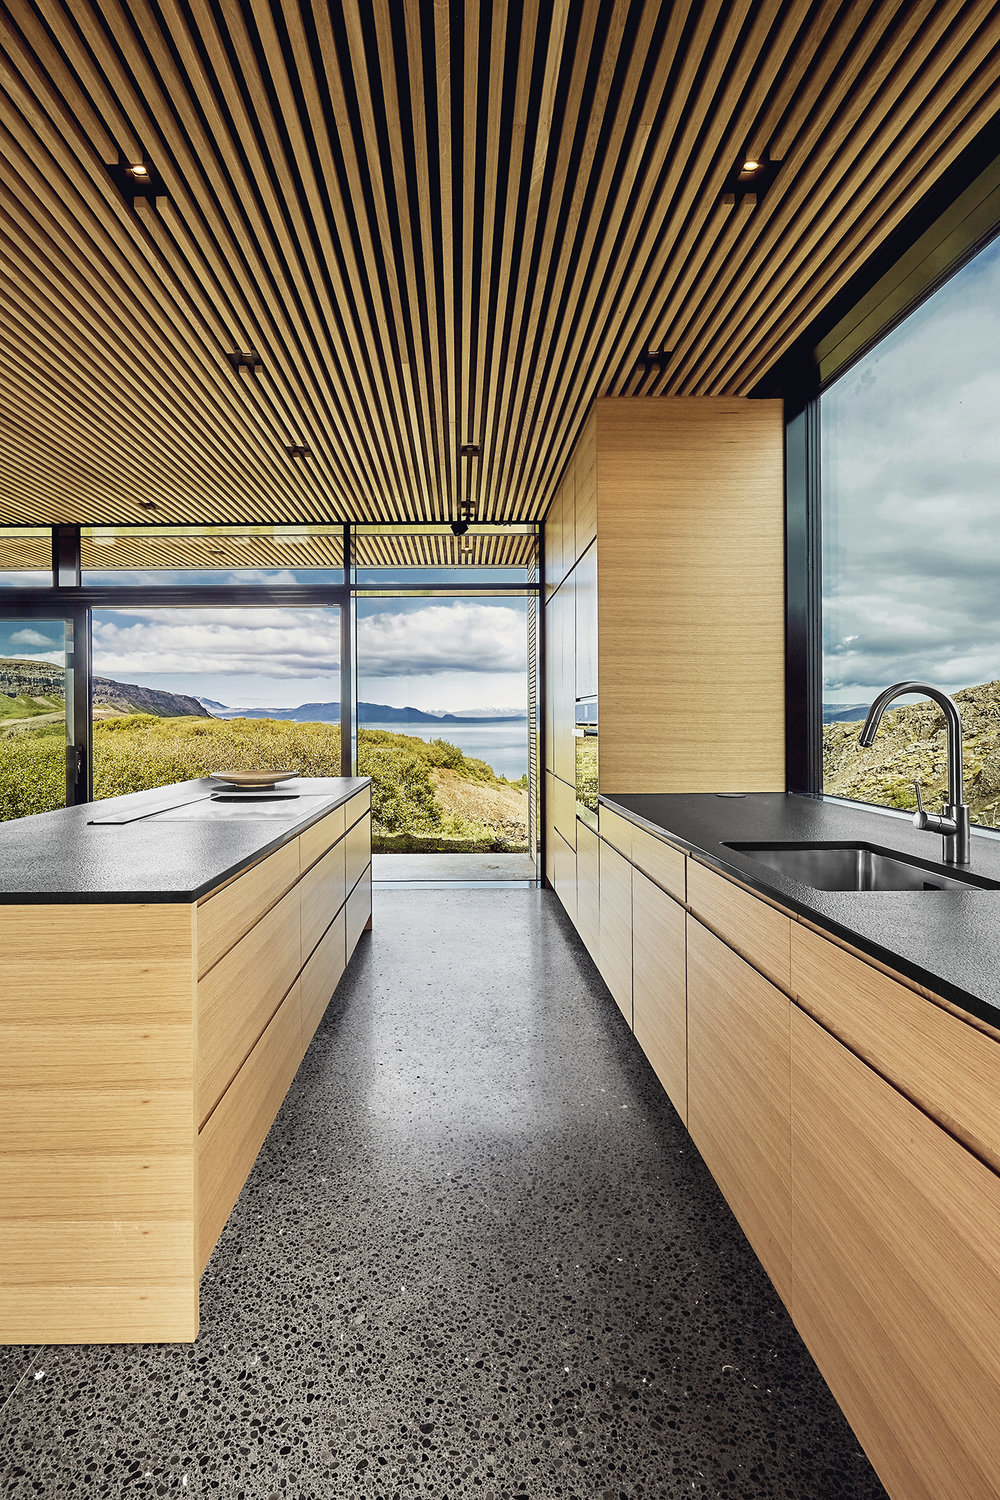 Stunning natural views are amazing and can be seen from every point of the house